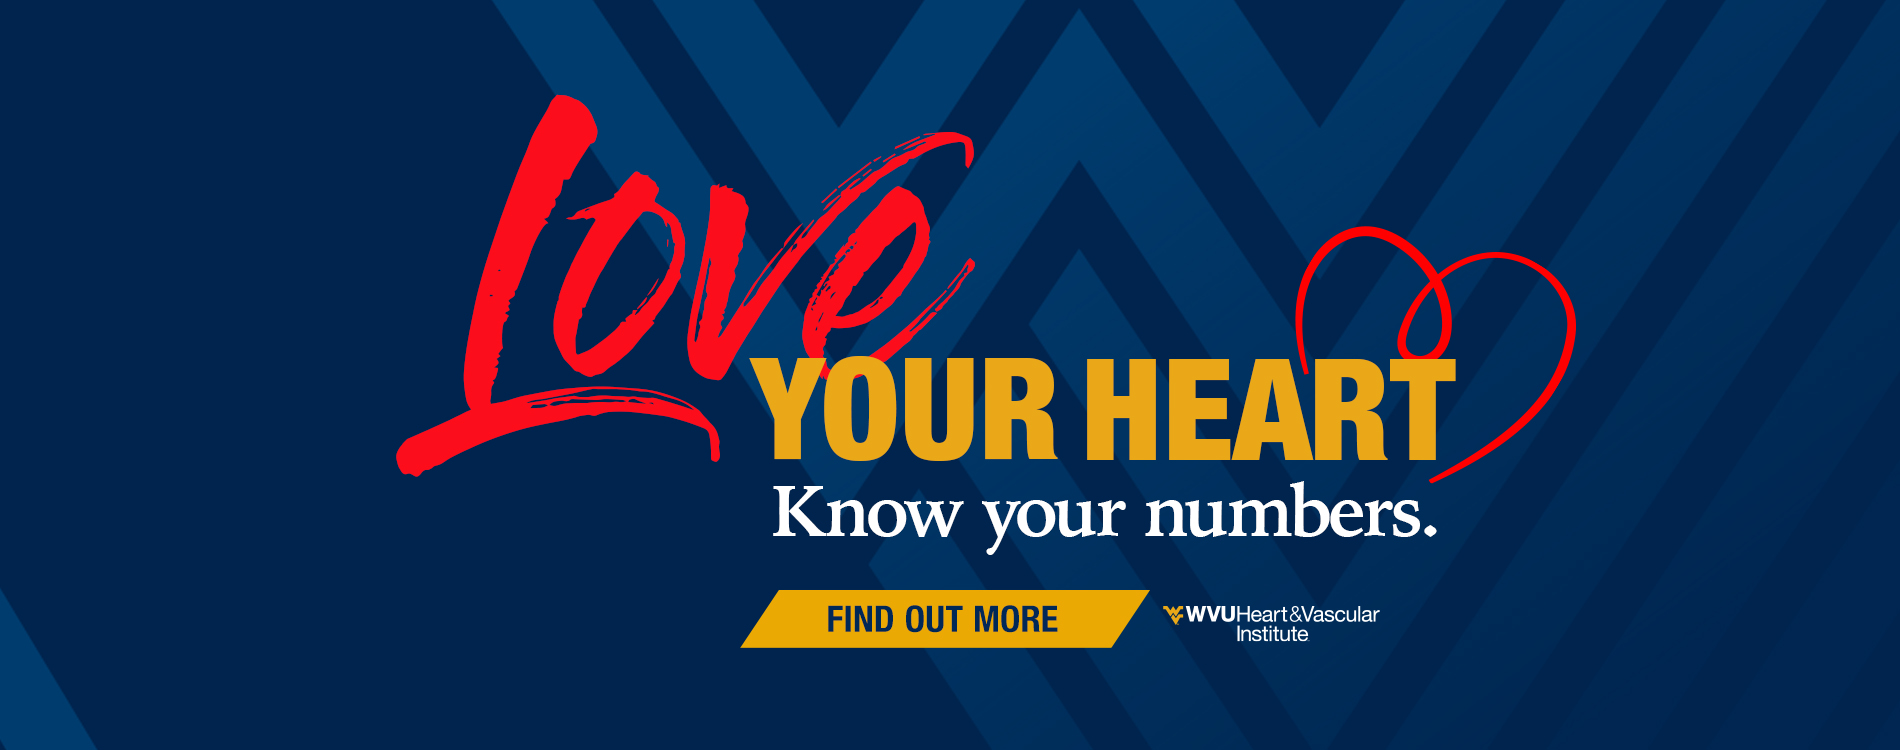 Love your Heart. Know your numbers.